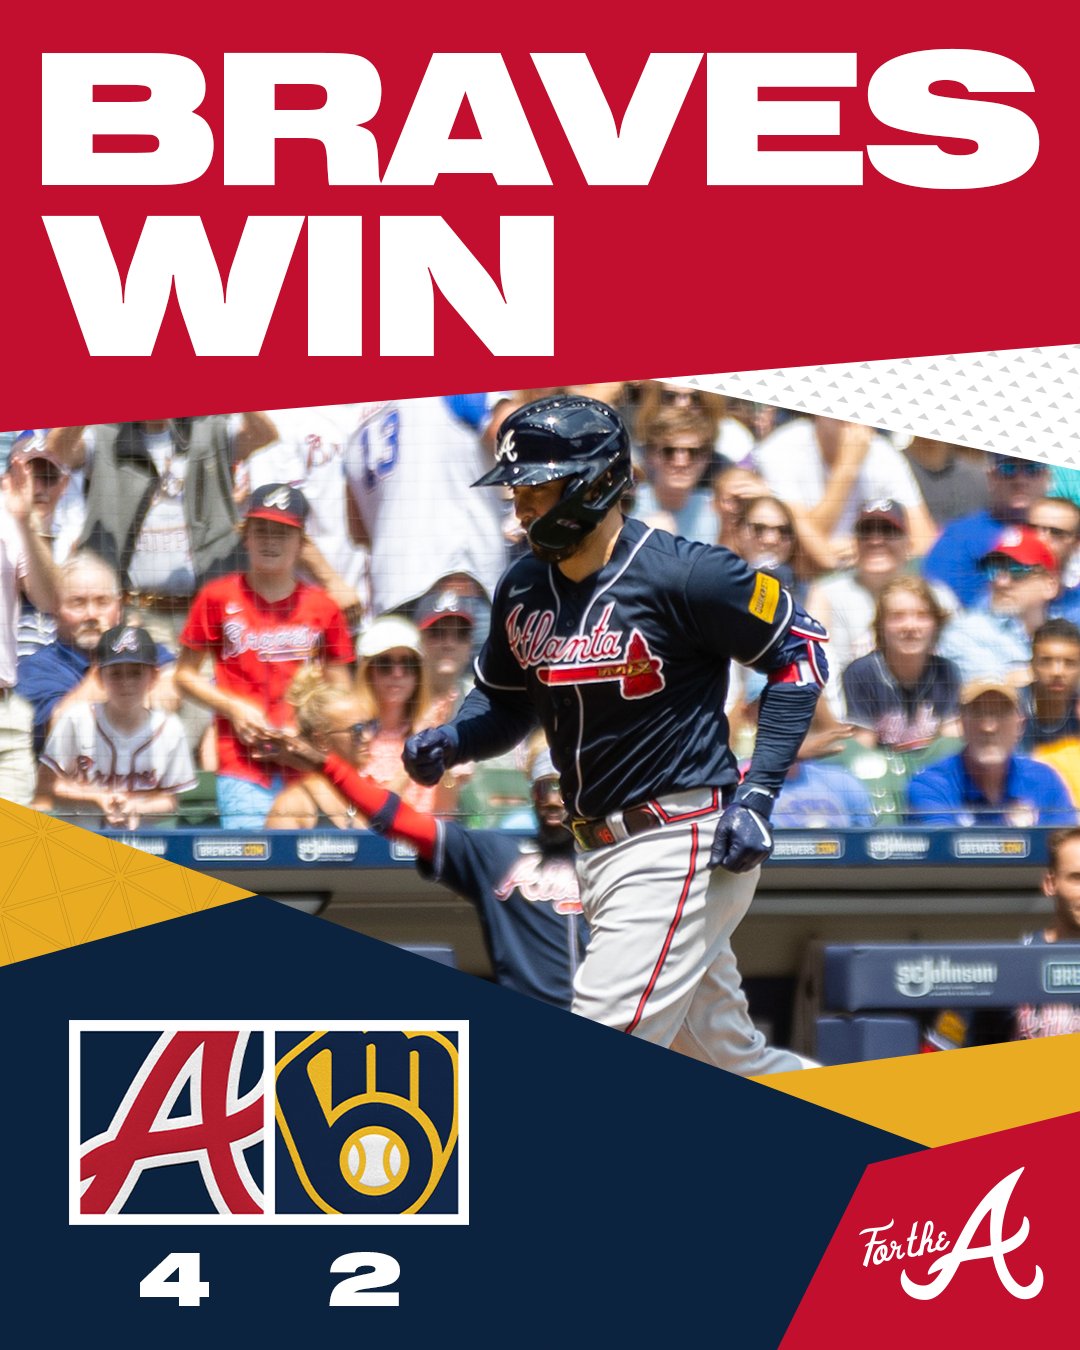 Final: Braves 4, Brewers 2.